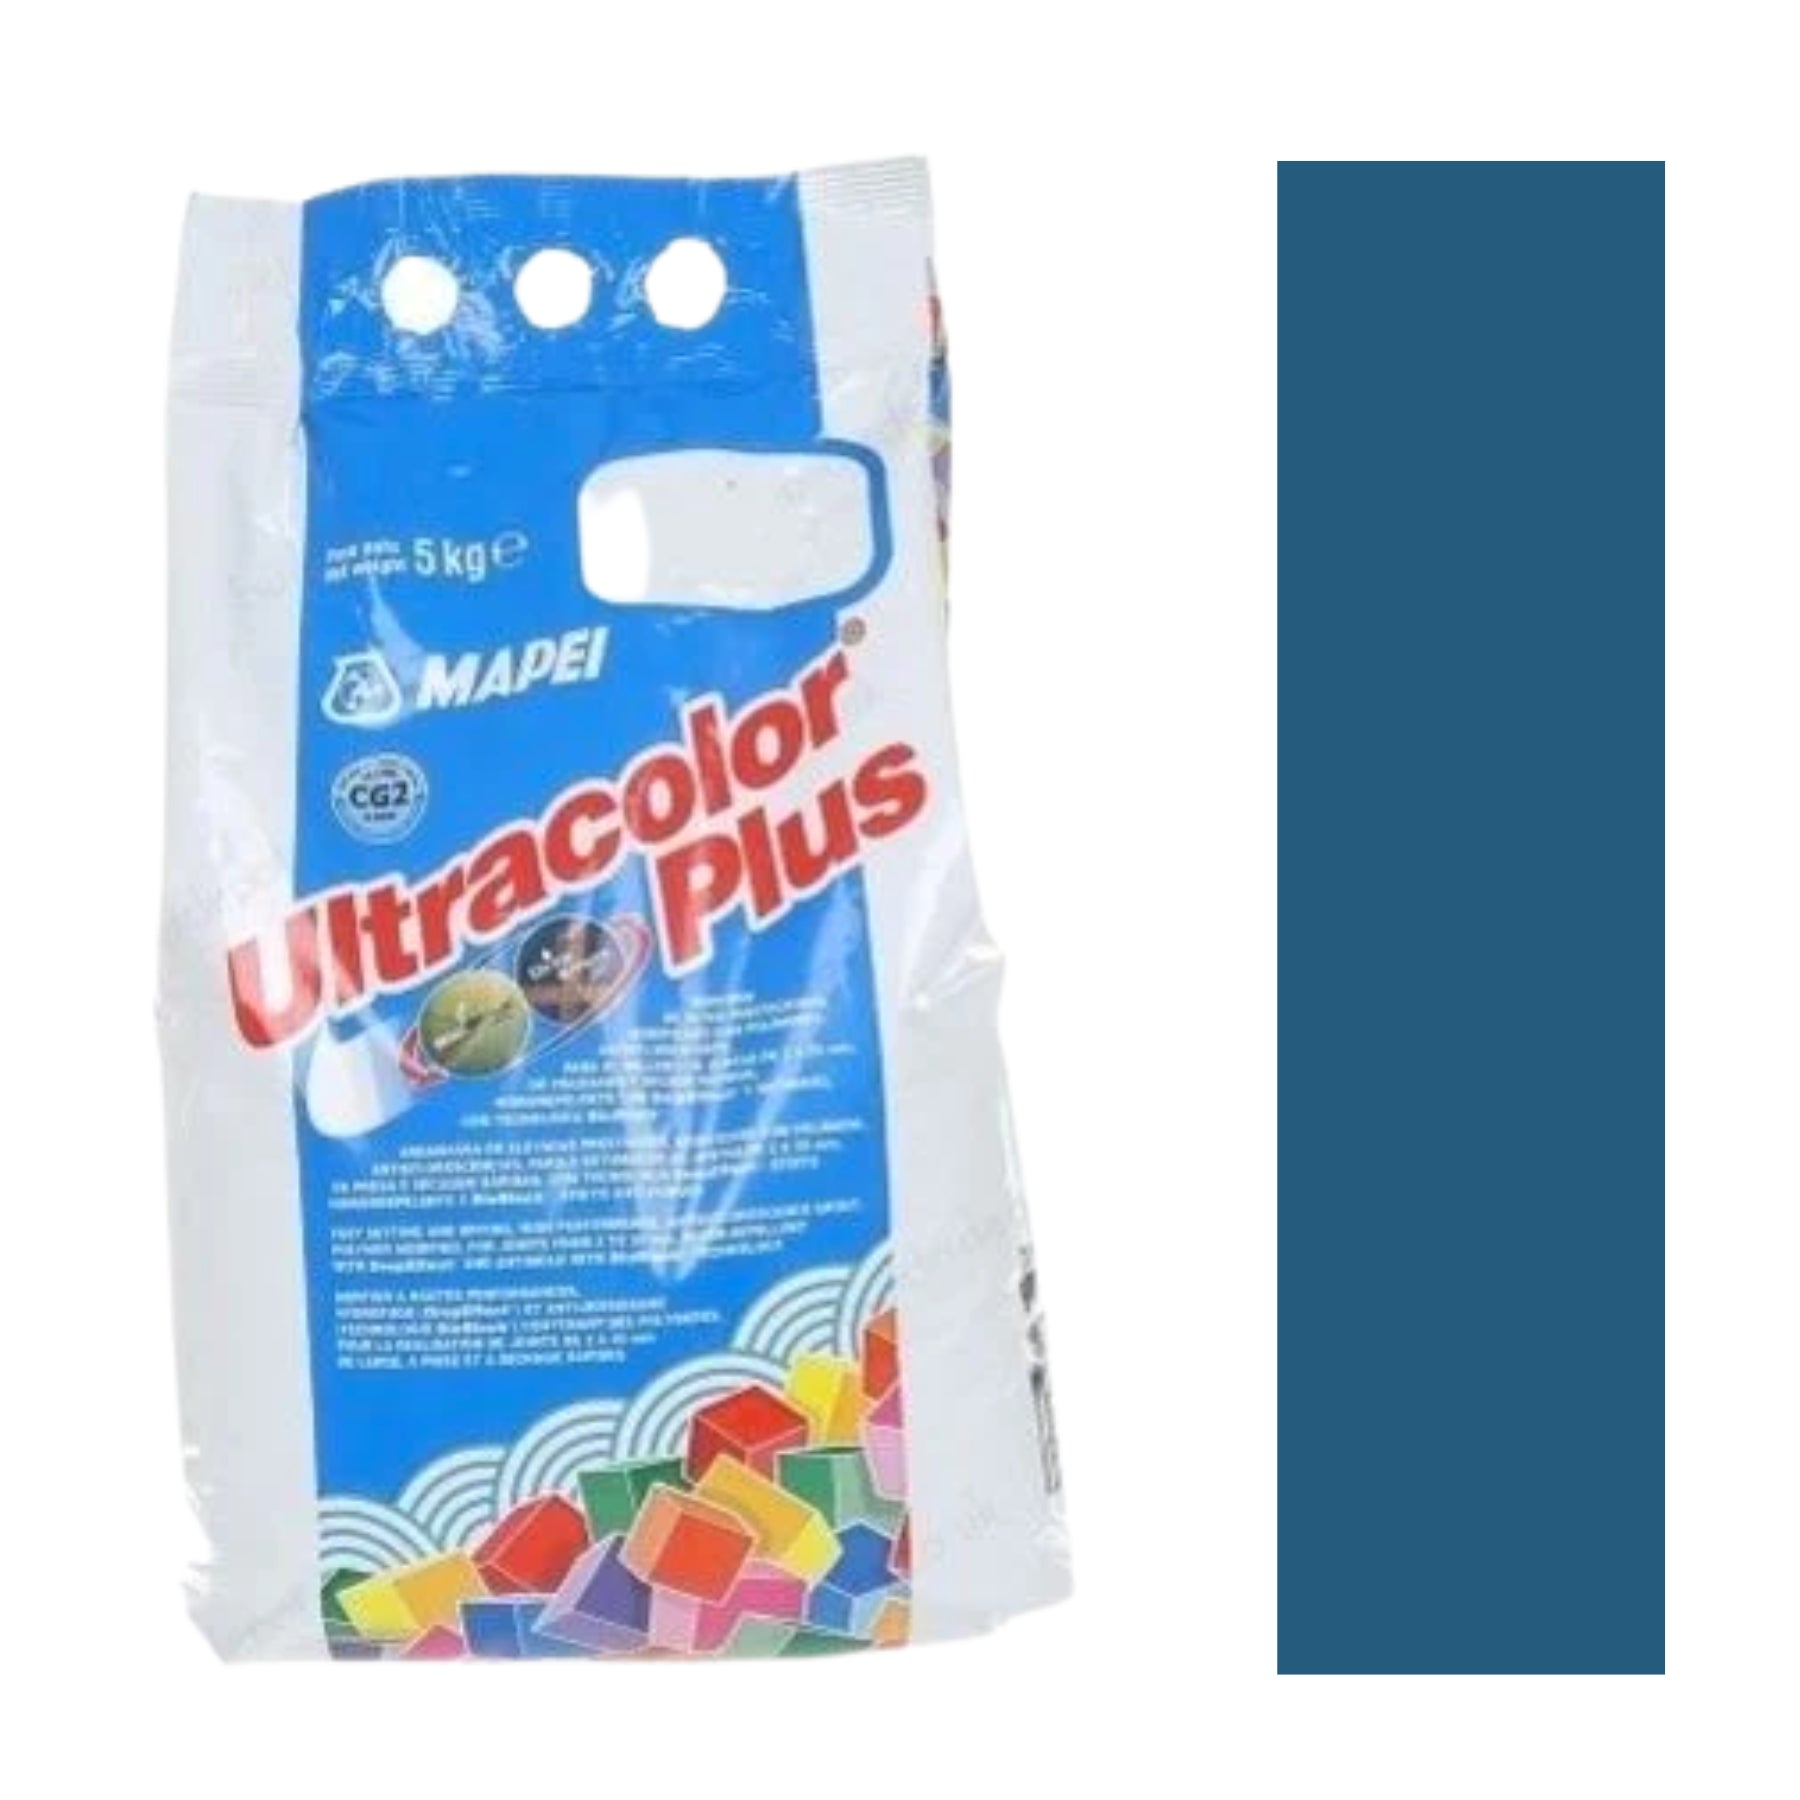 Ultracolor-plus Grout - 169 Steel Blue